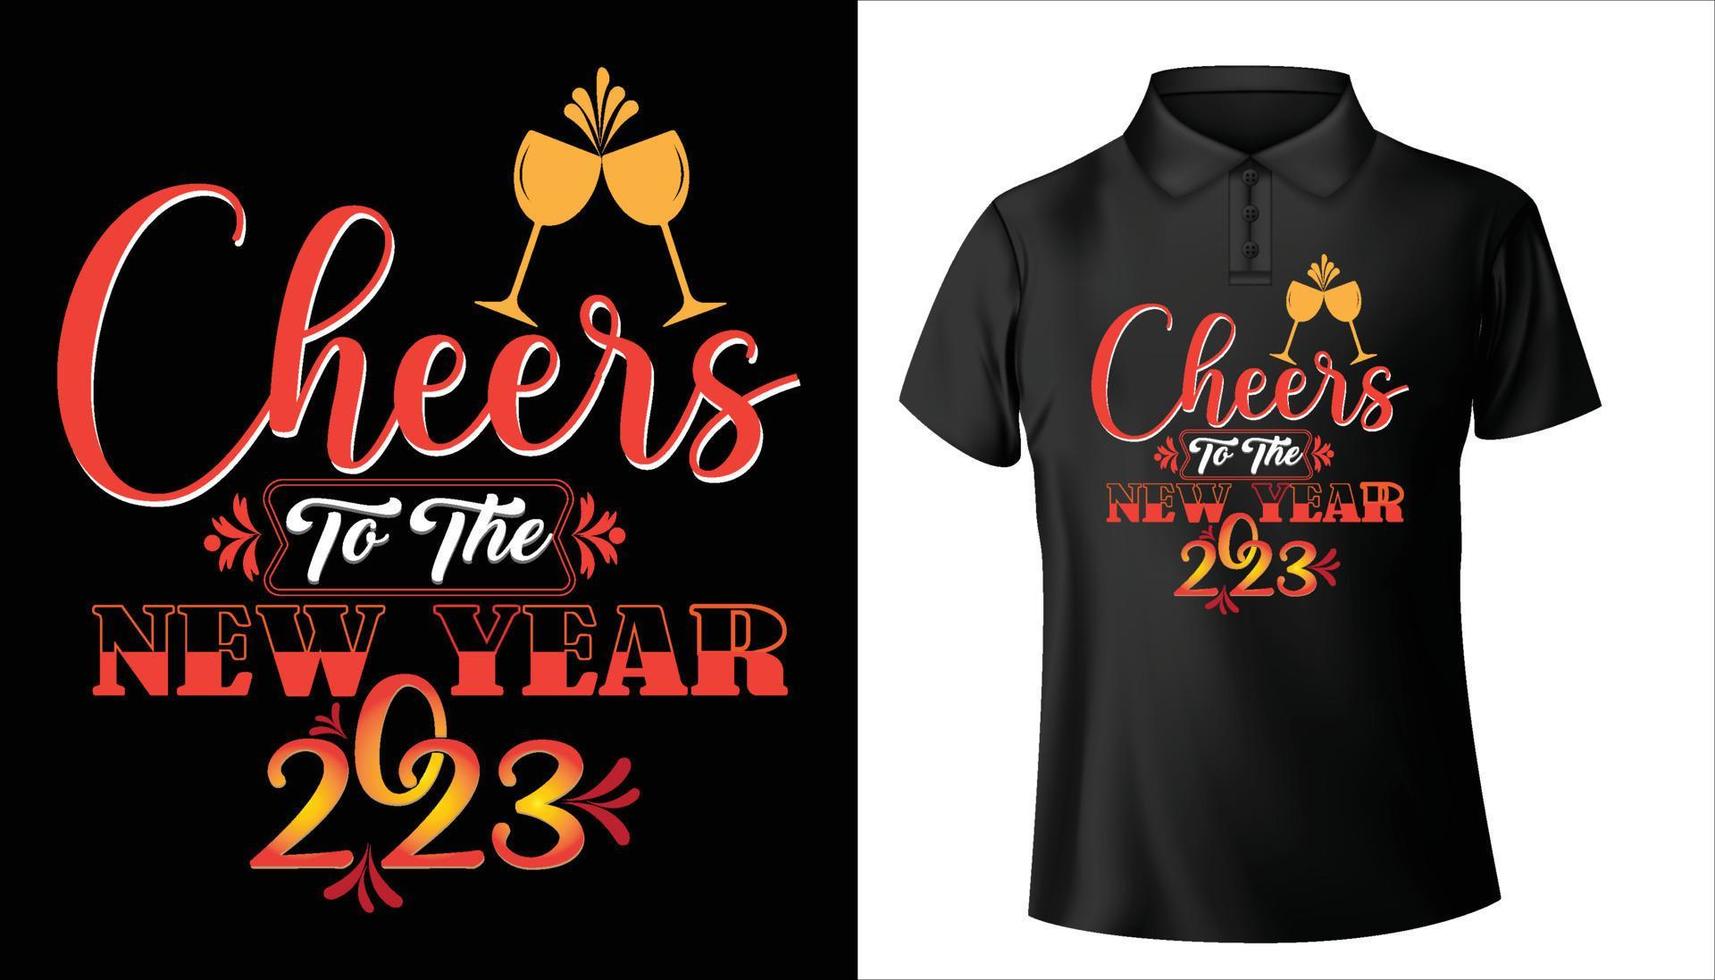 Cheers To The New Year 2023, happy new year 2023 typography t shirt design vector